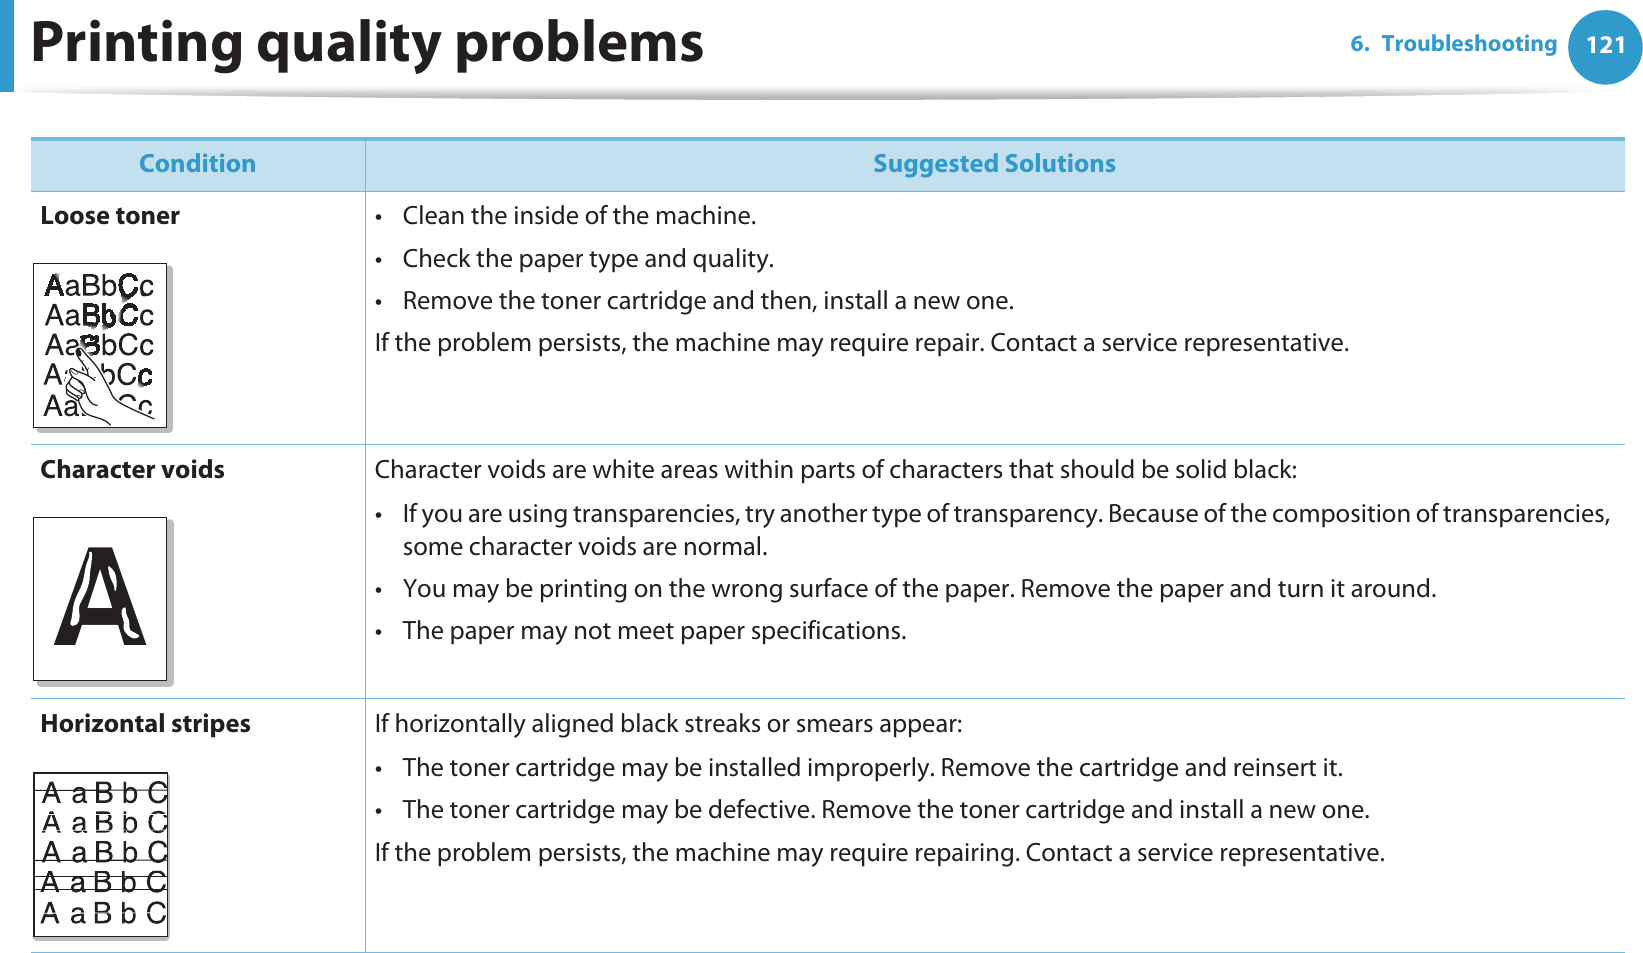 Printing quality problems 1216. TroubleshootingLoose toner • Clean the inside of the machine.• Check the paper type and quality.• Remove the toner cartridge and then, install a new one.If the problem persists, the machine may require repair. Contact a service representative.Character voids Character voids are white areas within parts of characters that should be solid black:• If you are using transparencies, try another type of transparency. Because of the composition of transparencies, some character voids are normal. • You may be printing on the wrong surface of the paper. Remove the paper and turn it around. • The paper may not meet paper specifications.Horizontal stripes If horizontally aligned black streaks or smears appear:• The toner cartridge may be installed improperly. Remove the cartridge and reinsert it.• The toner cartridge may be defective. Remove the toner cartridge and install a new one.If the problem persists, the machine may require repairing. Contact a service representative.Condition Suggested SolutionsA